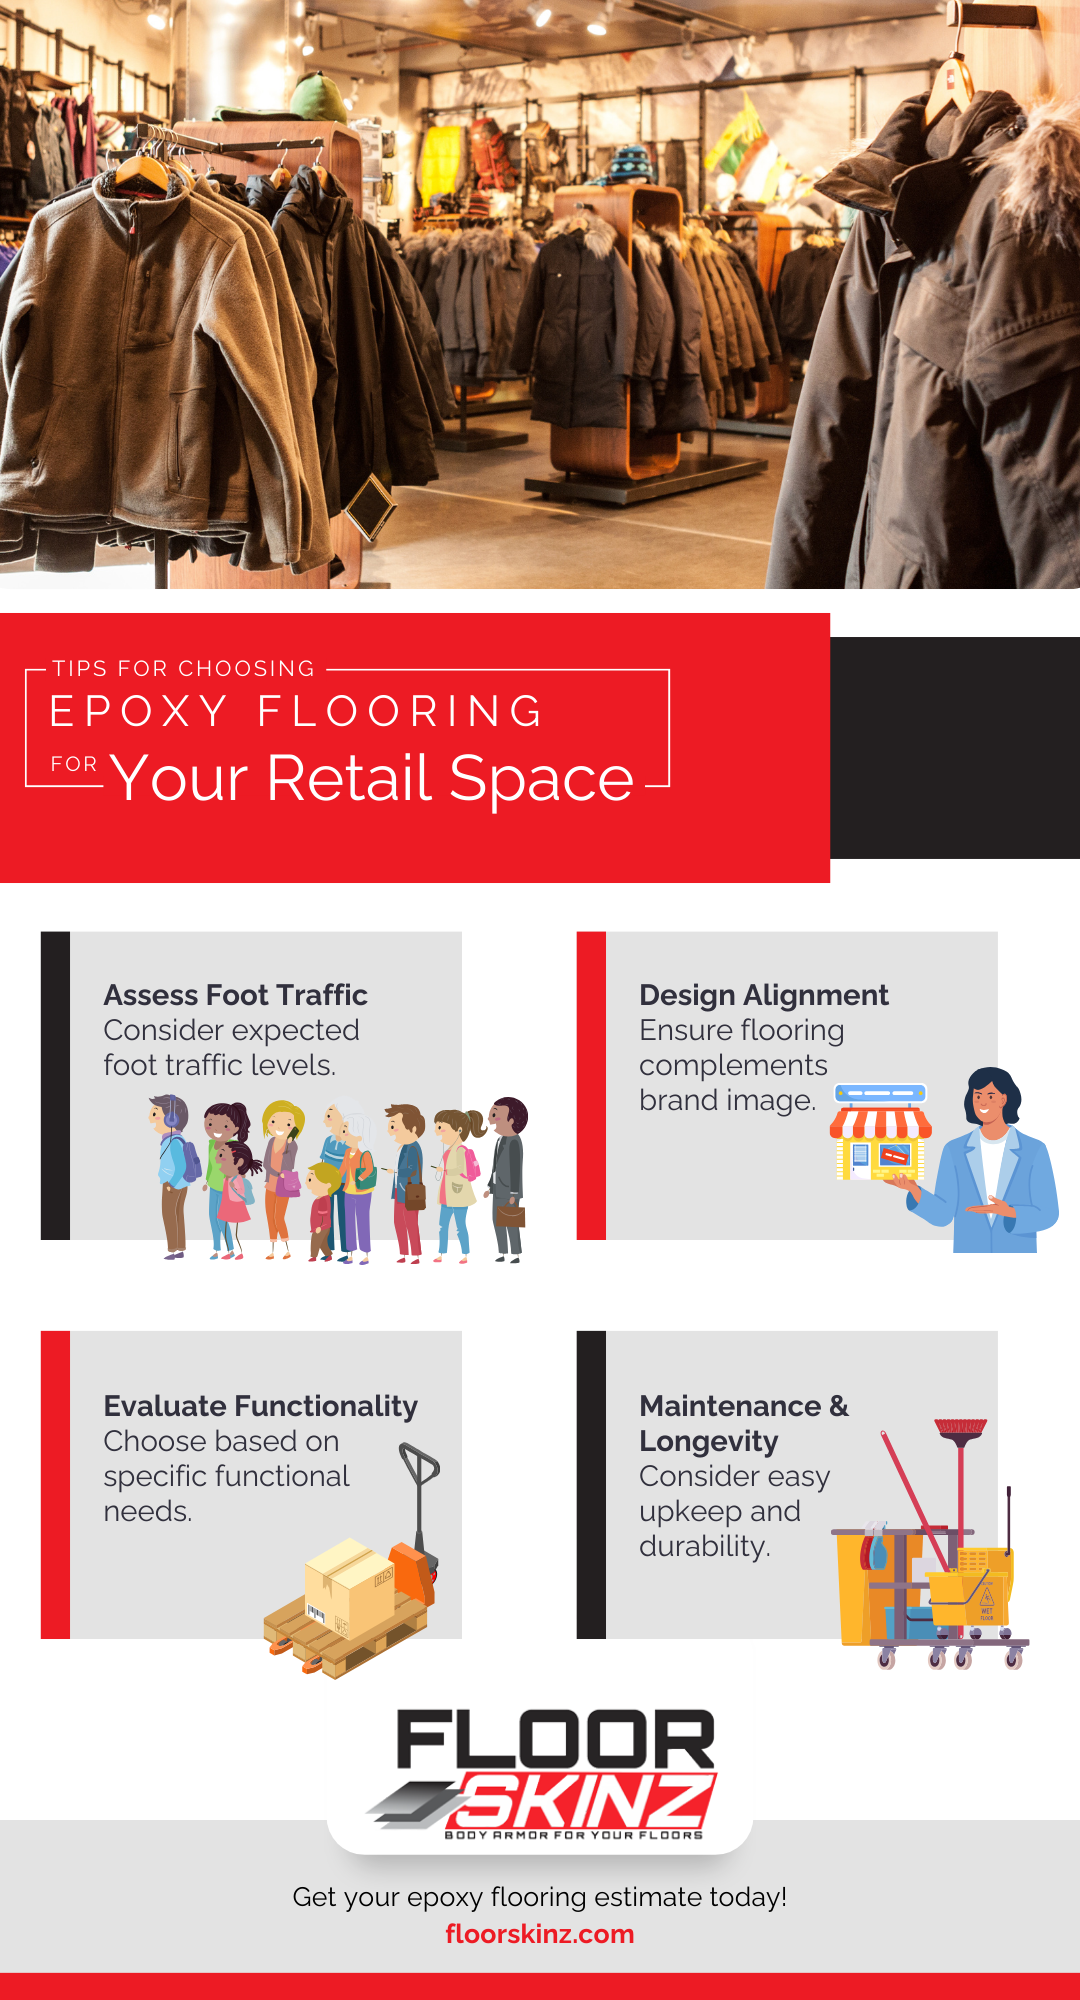 infographic about tips for choosing epoxy flooring for retail space